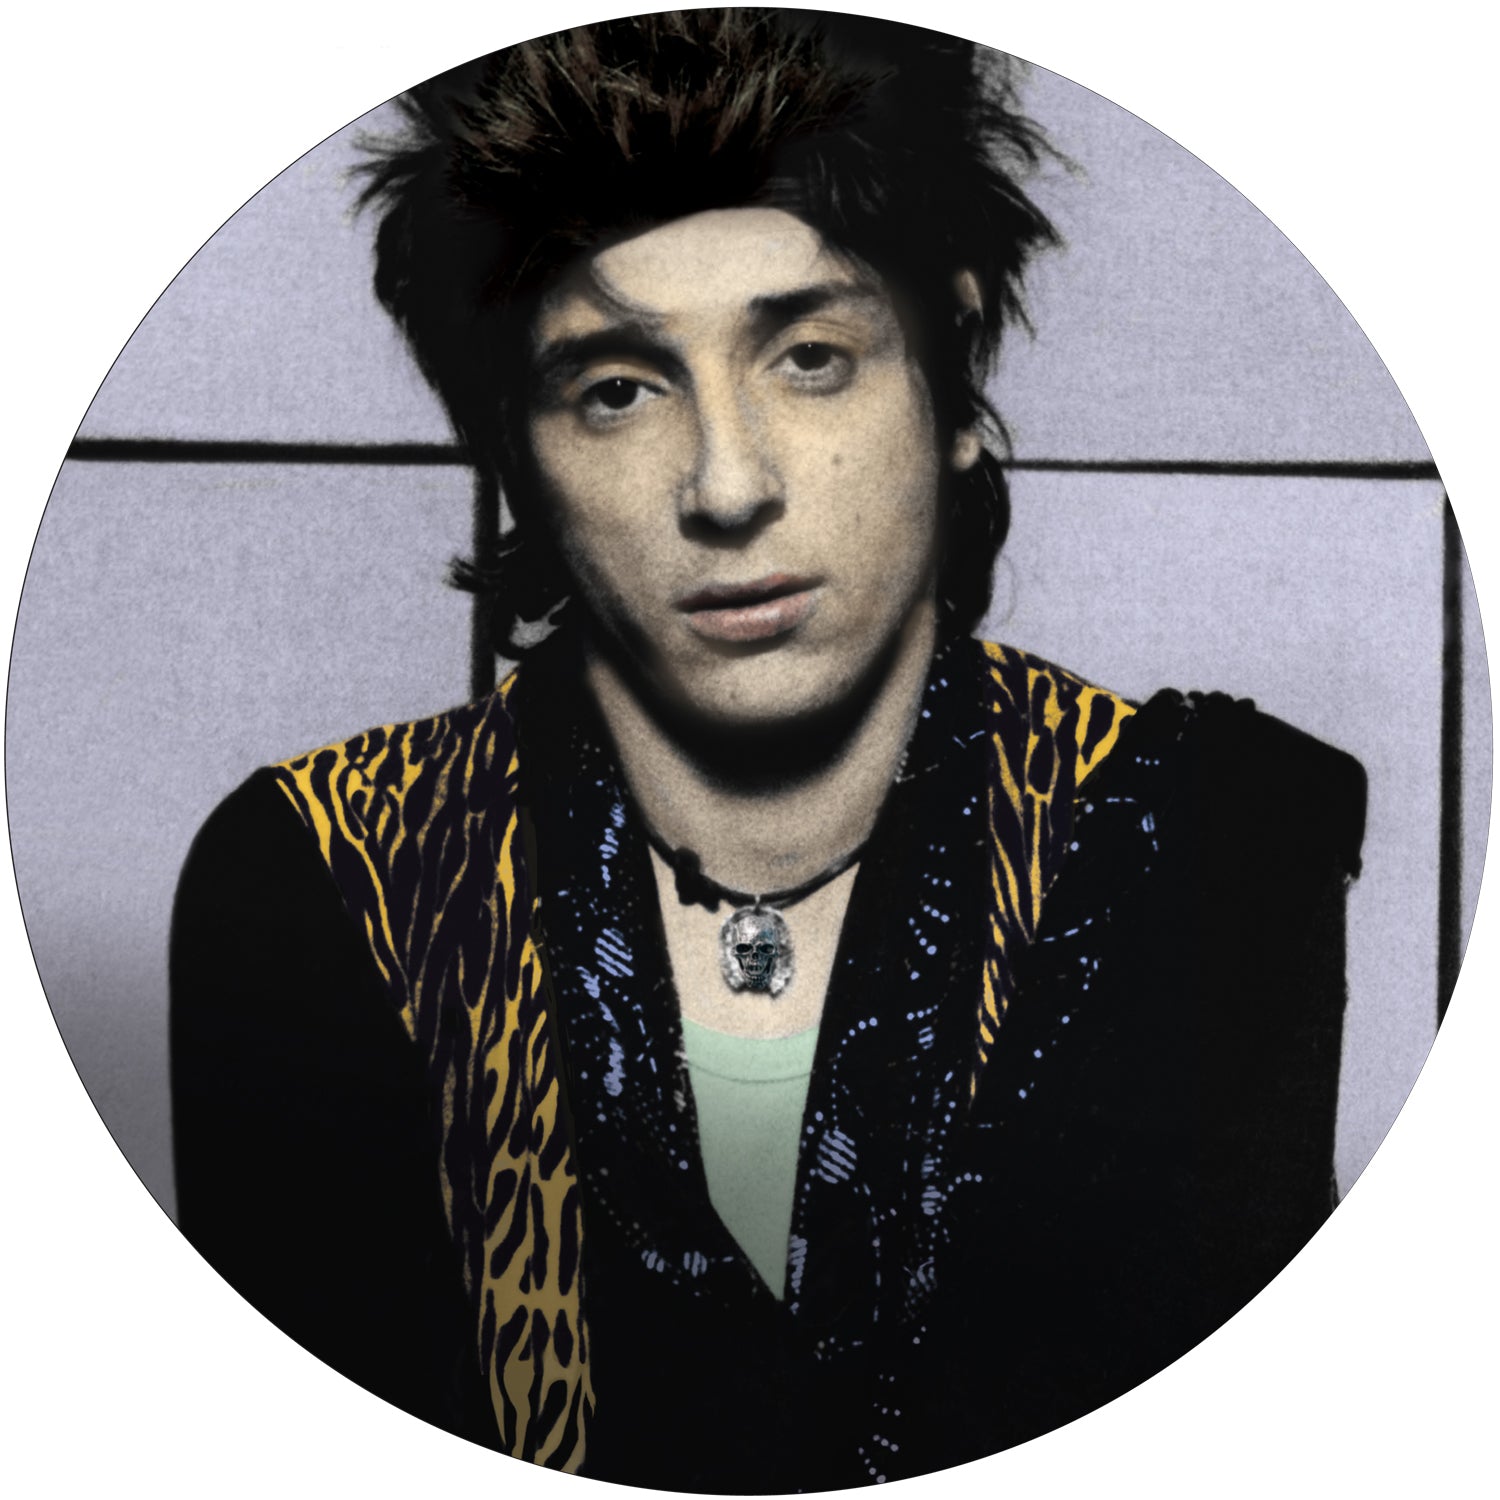 Johnny Thunders - Dawn Of The Dead: Live At Max’s Kansas City (New York)